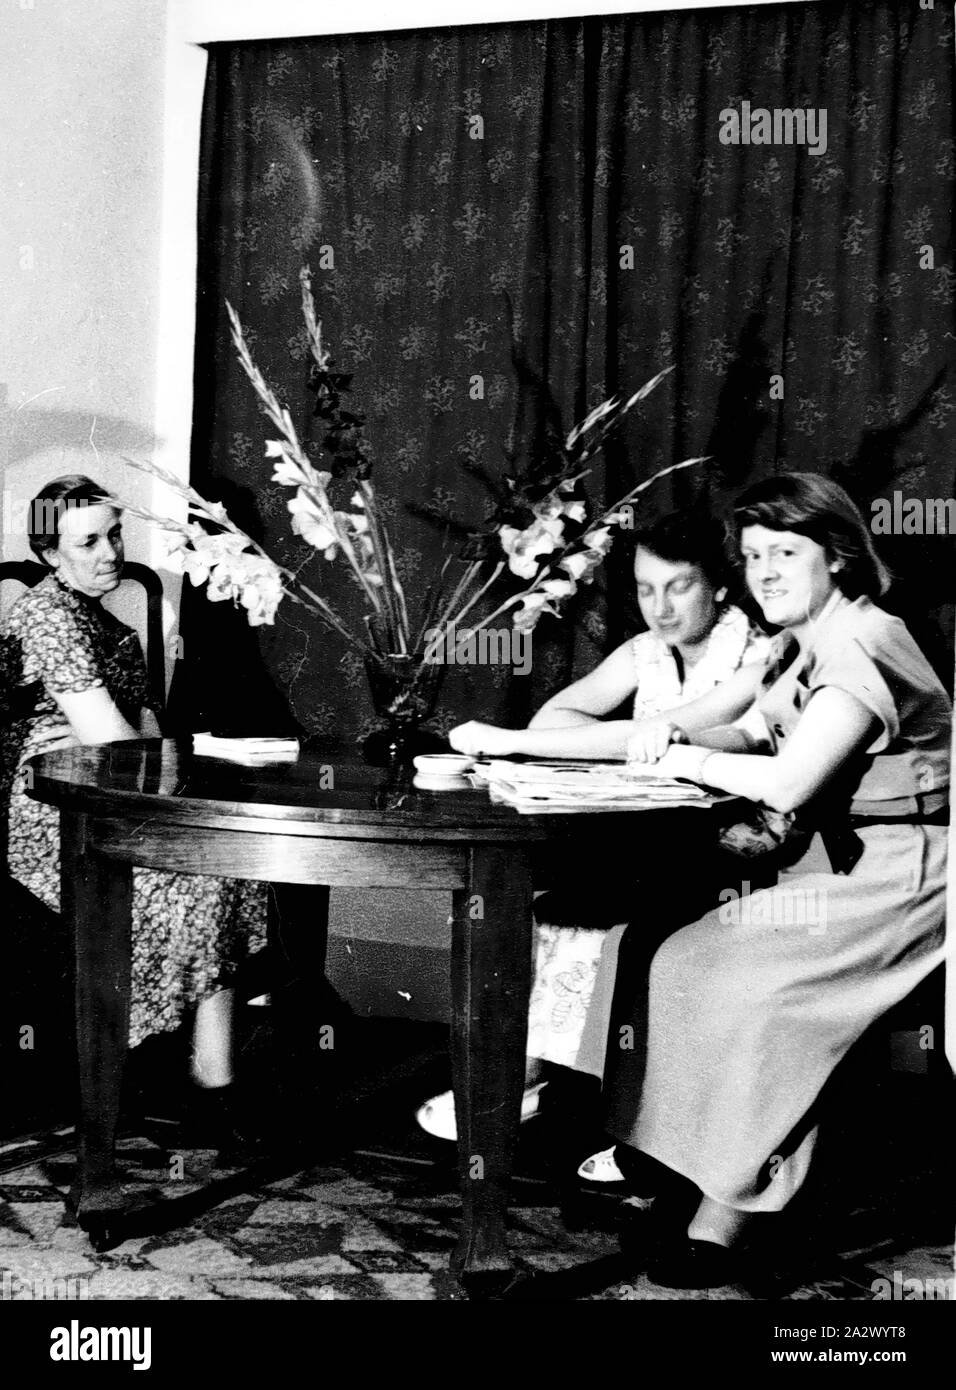 Negative - Graham Family in Dining Room, Hartwell, Victoria, 1948, Black and white negative of the Graham family in the dining room of their home in Hartwell, 1948. At left is Mrs Henrietta Graham, nee Mitchell, with her daughters - in the middle is Ruth Graham, and at right is Mary Graham Stock Photo